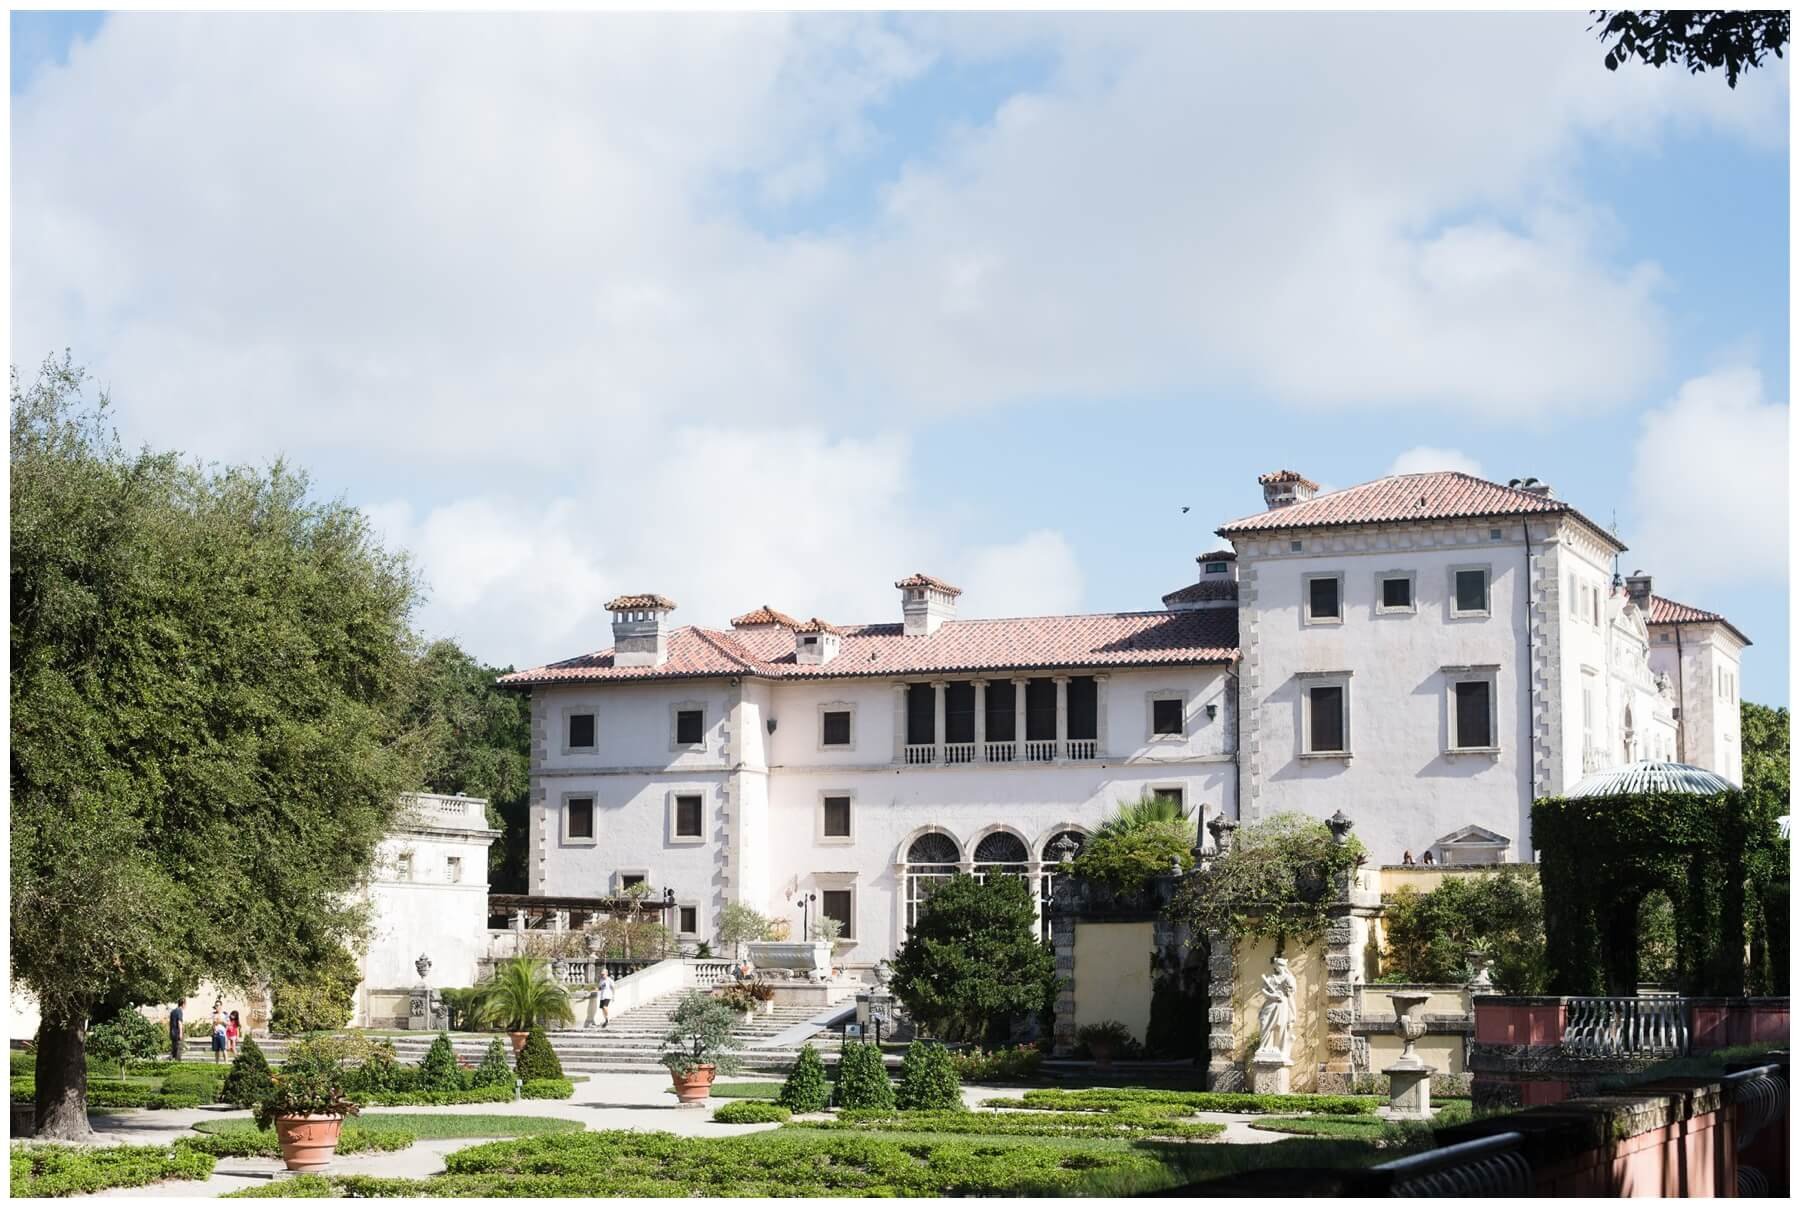 Photo of white building at Vizcaya Garden and Museums | NKB Photo